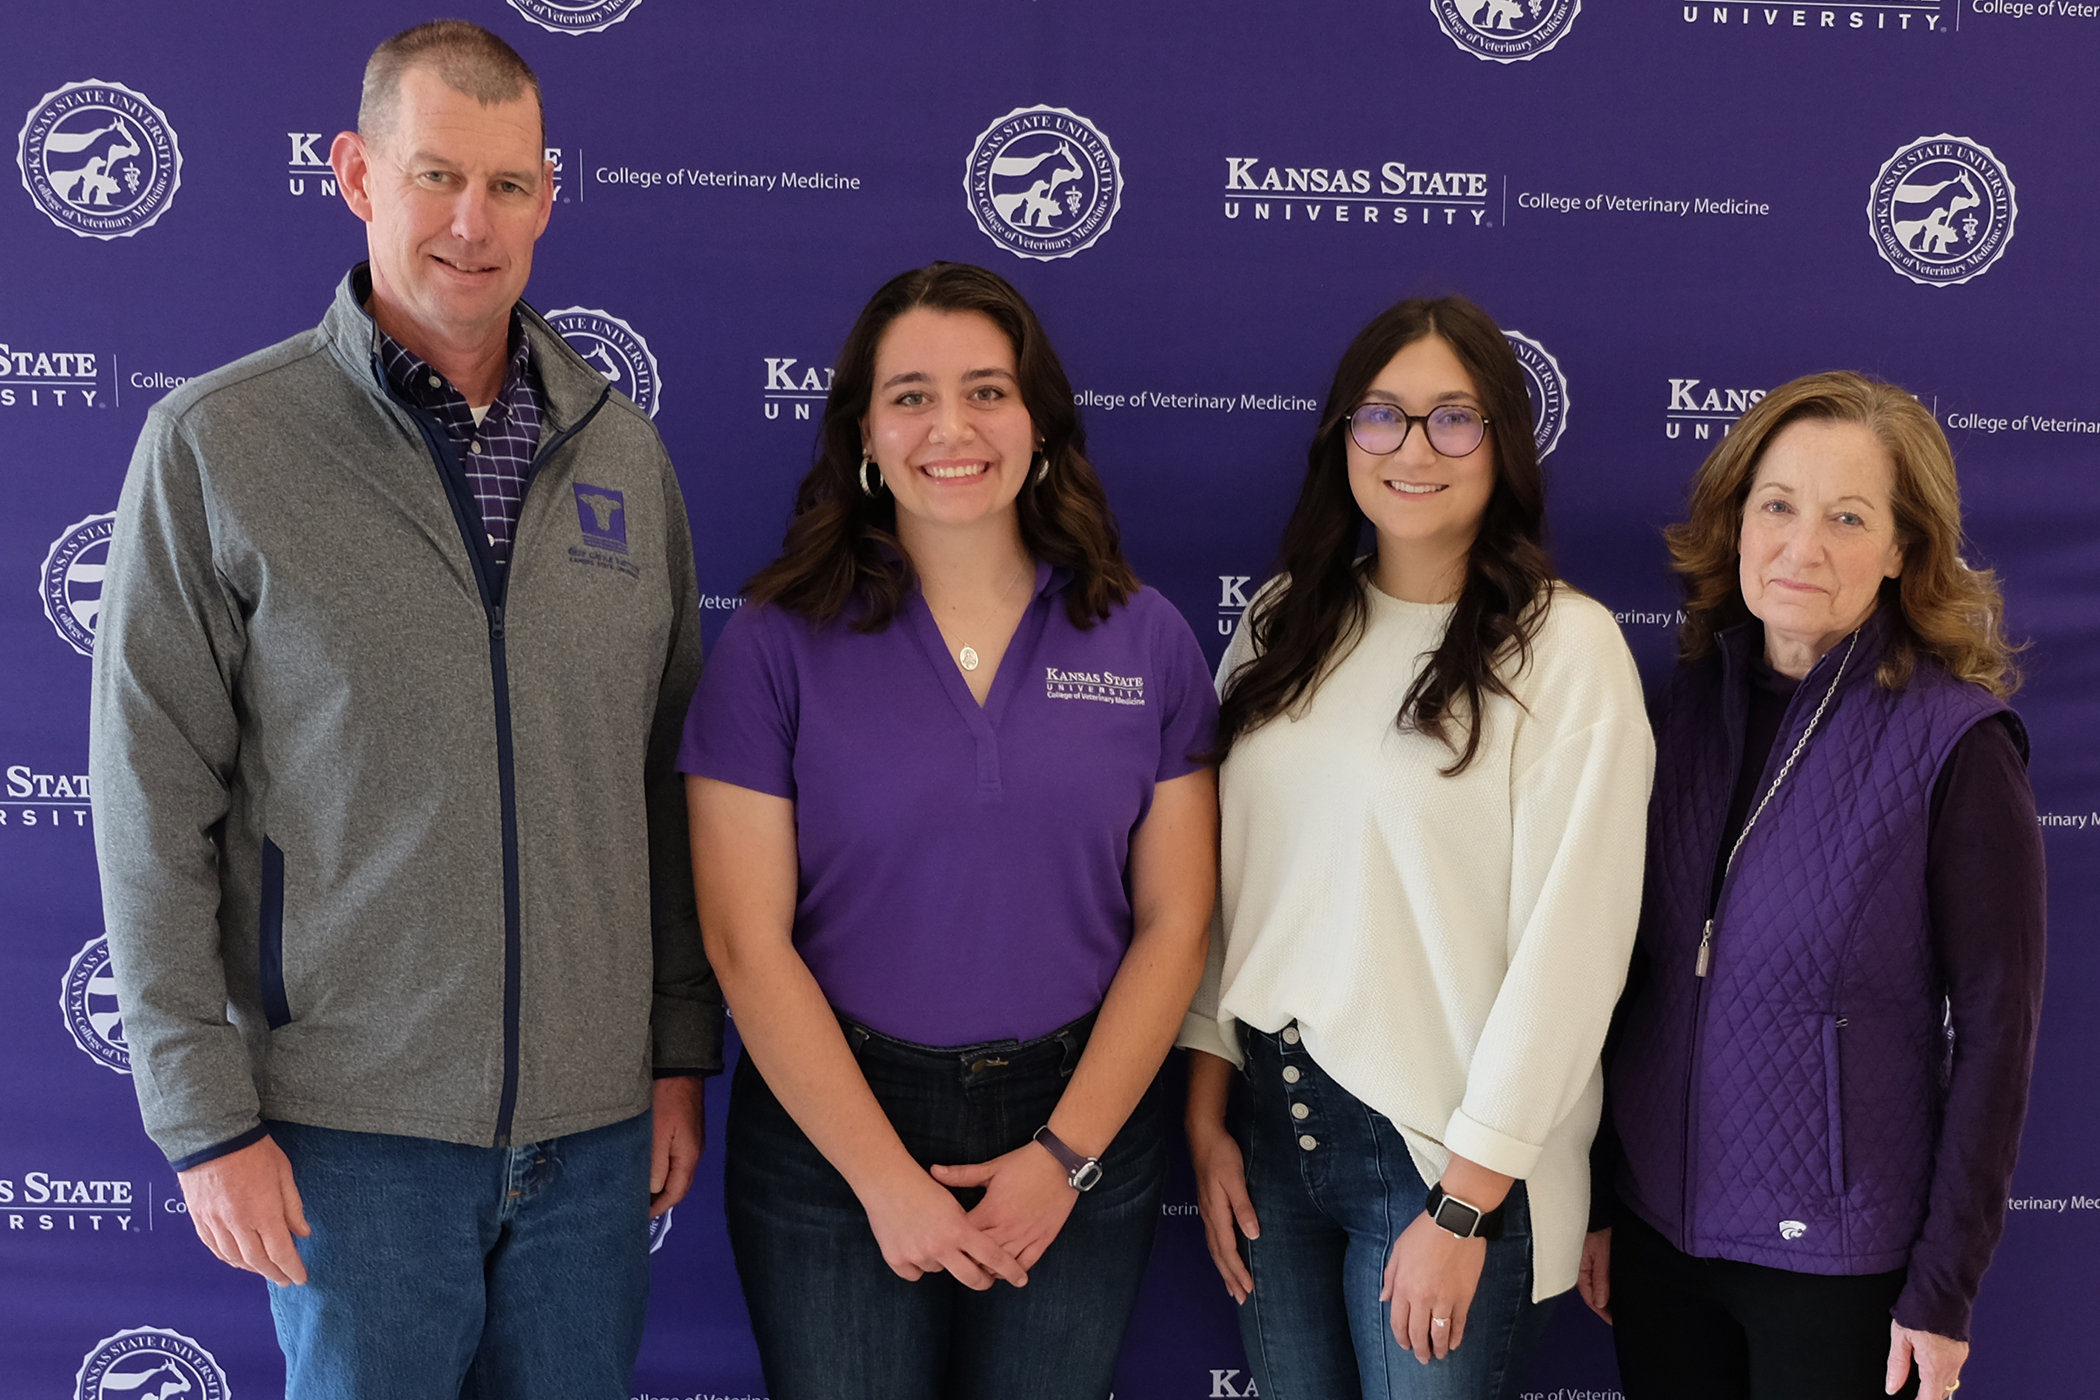 College of Veterinary Medicine adds two students to rural training program